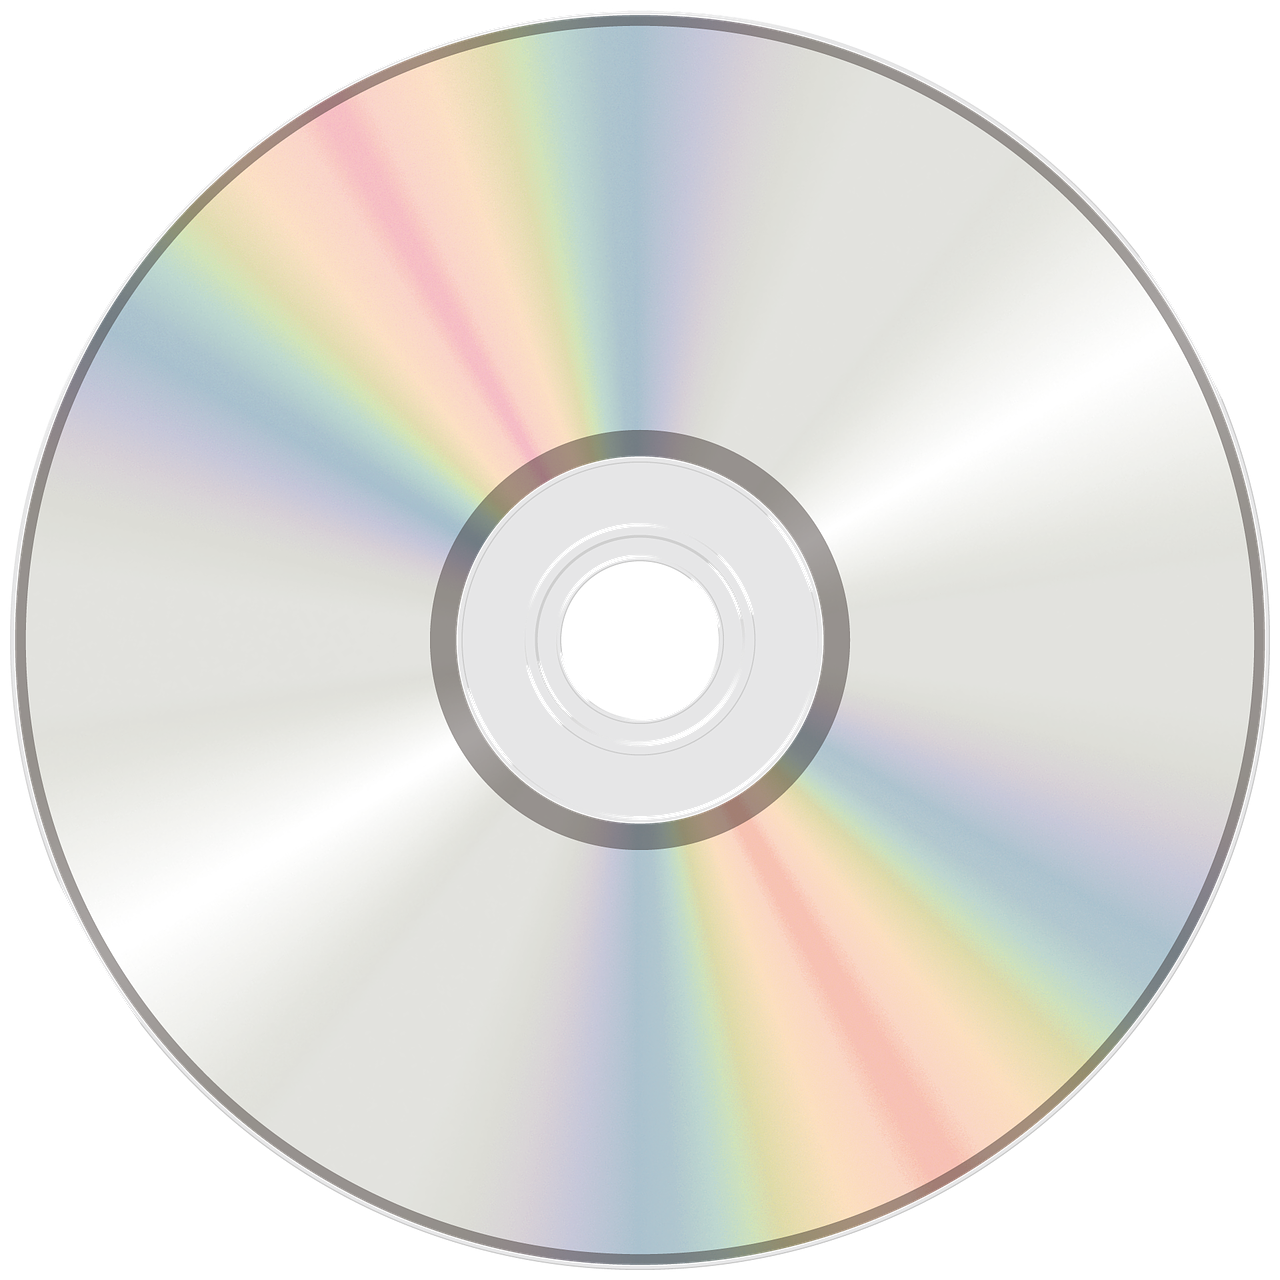 compact disk magneto-optical disk pc free photo